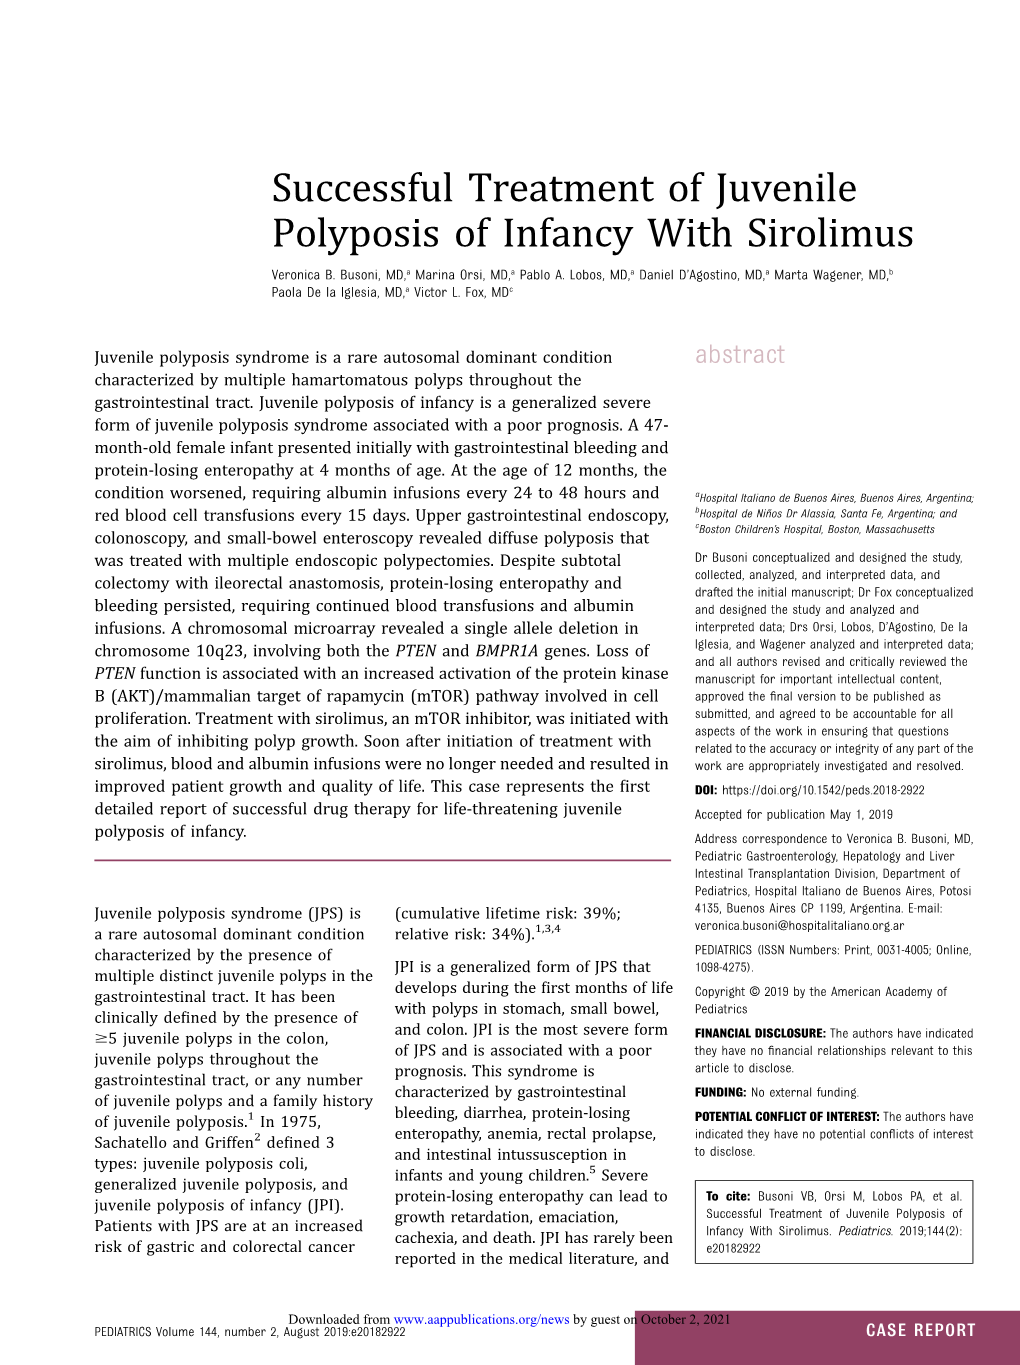 Successful Treatment of Juvenile Polyposis of Infancy with Sirolimus Veronica B